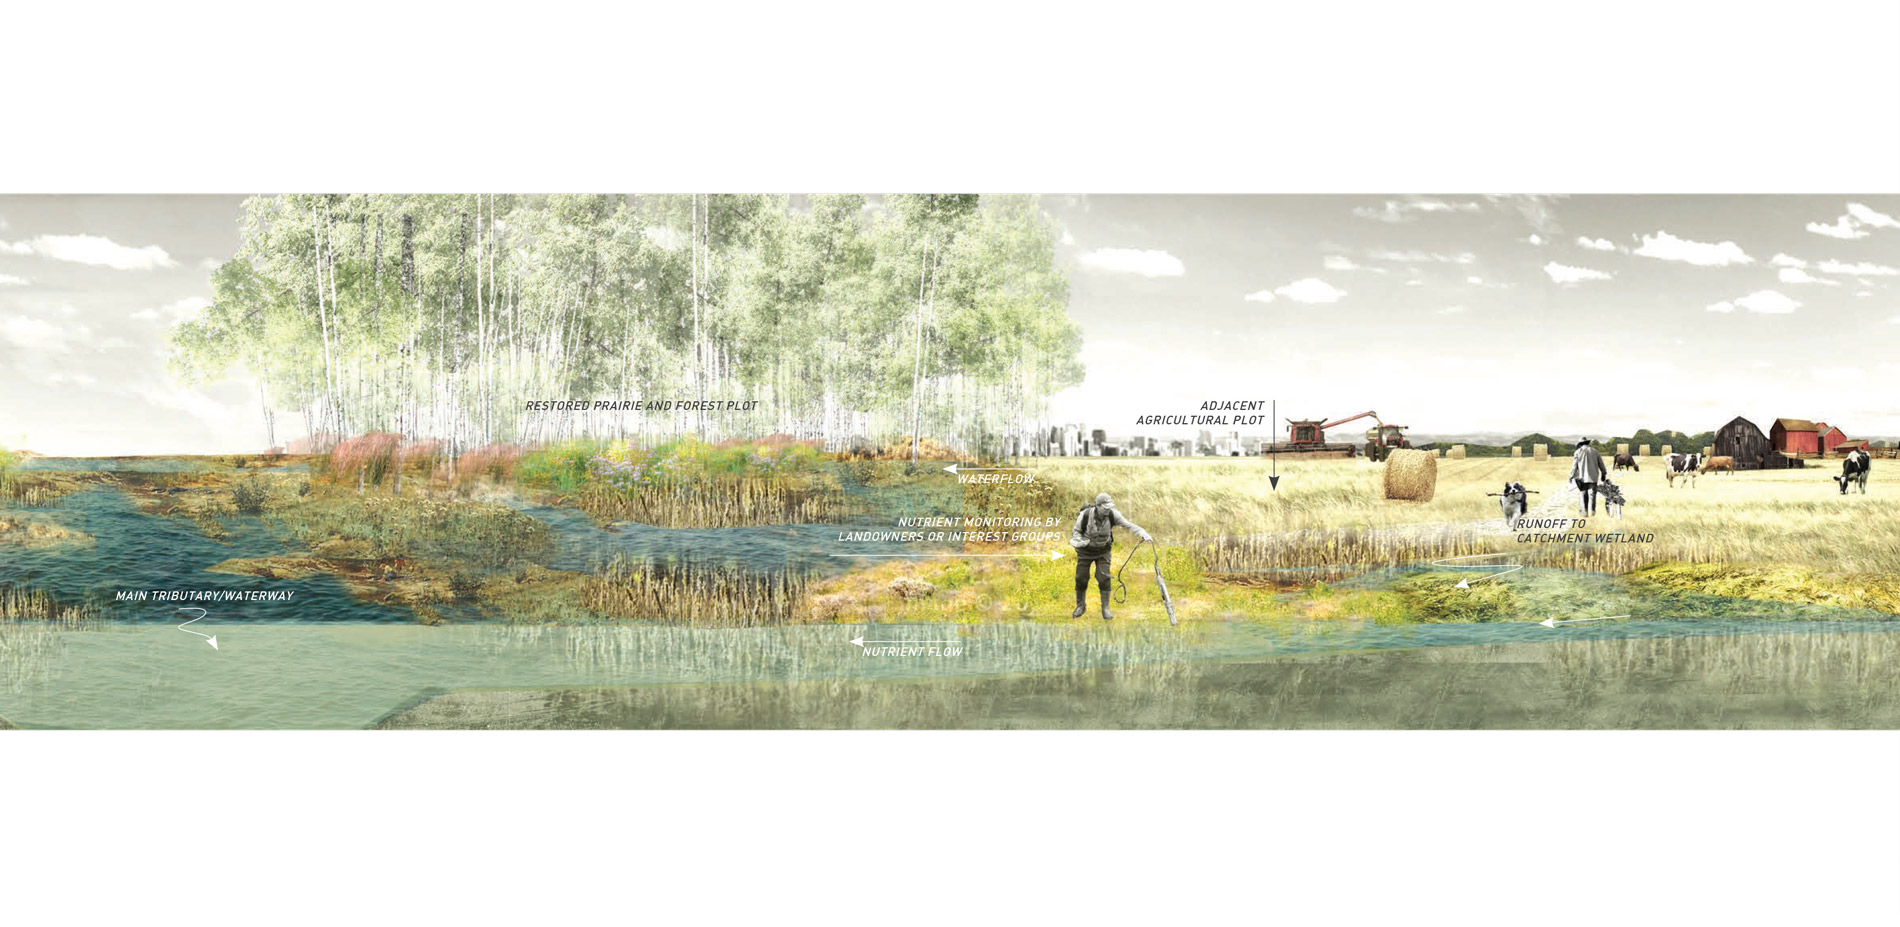 The intervention observes the relationship between a farming practice and an adjacent converted plot where drainage can collect towards wetland, fores…